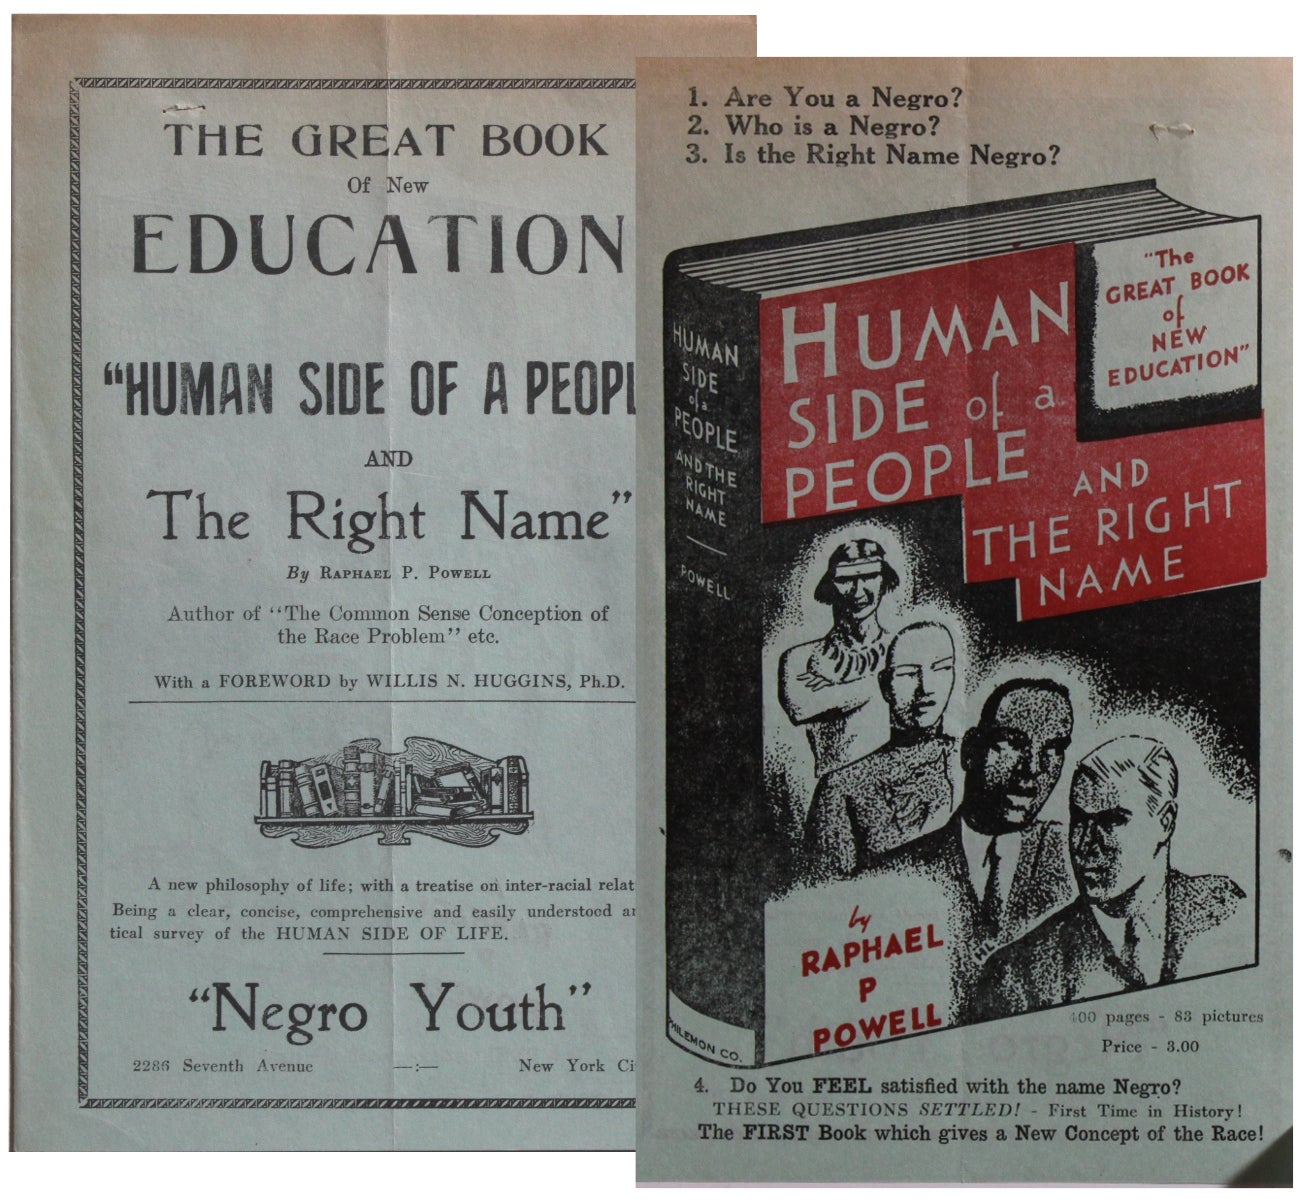 The Great Book Of New Education! “Human Side Of A People And The Right Name” . . ....